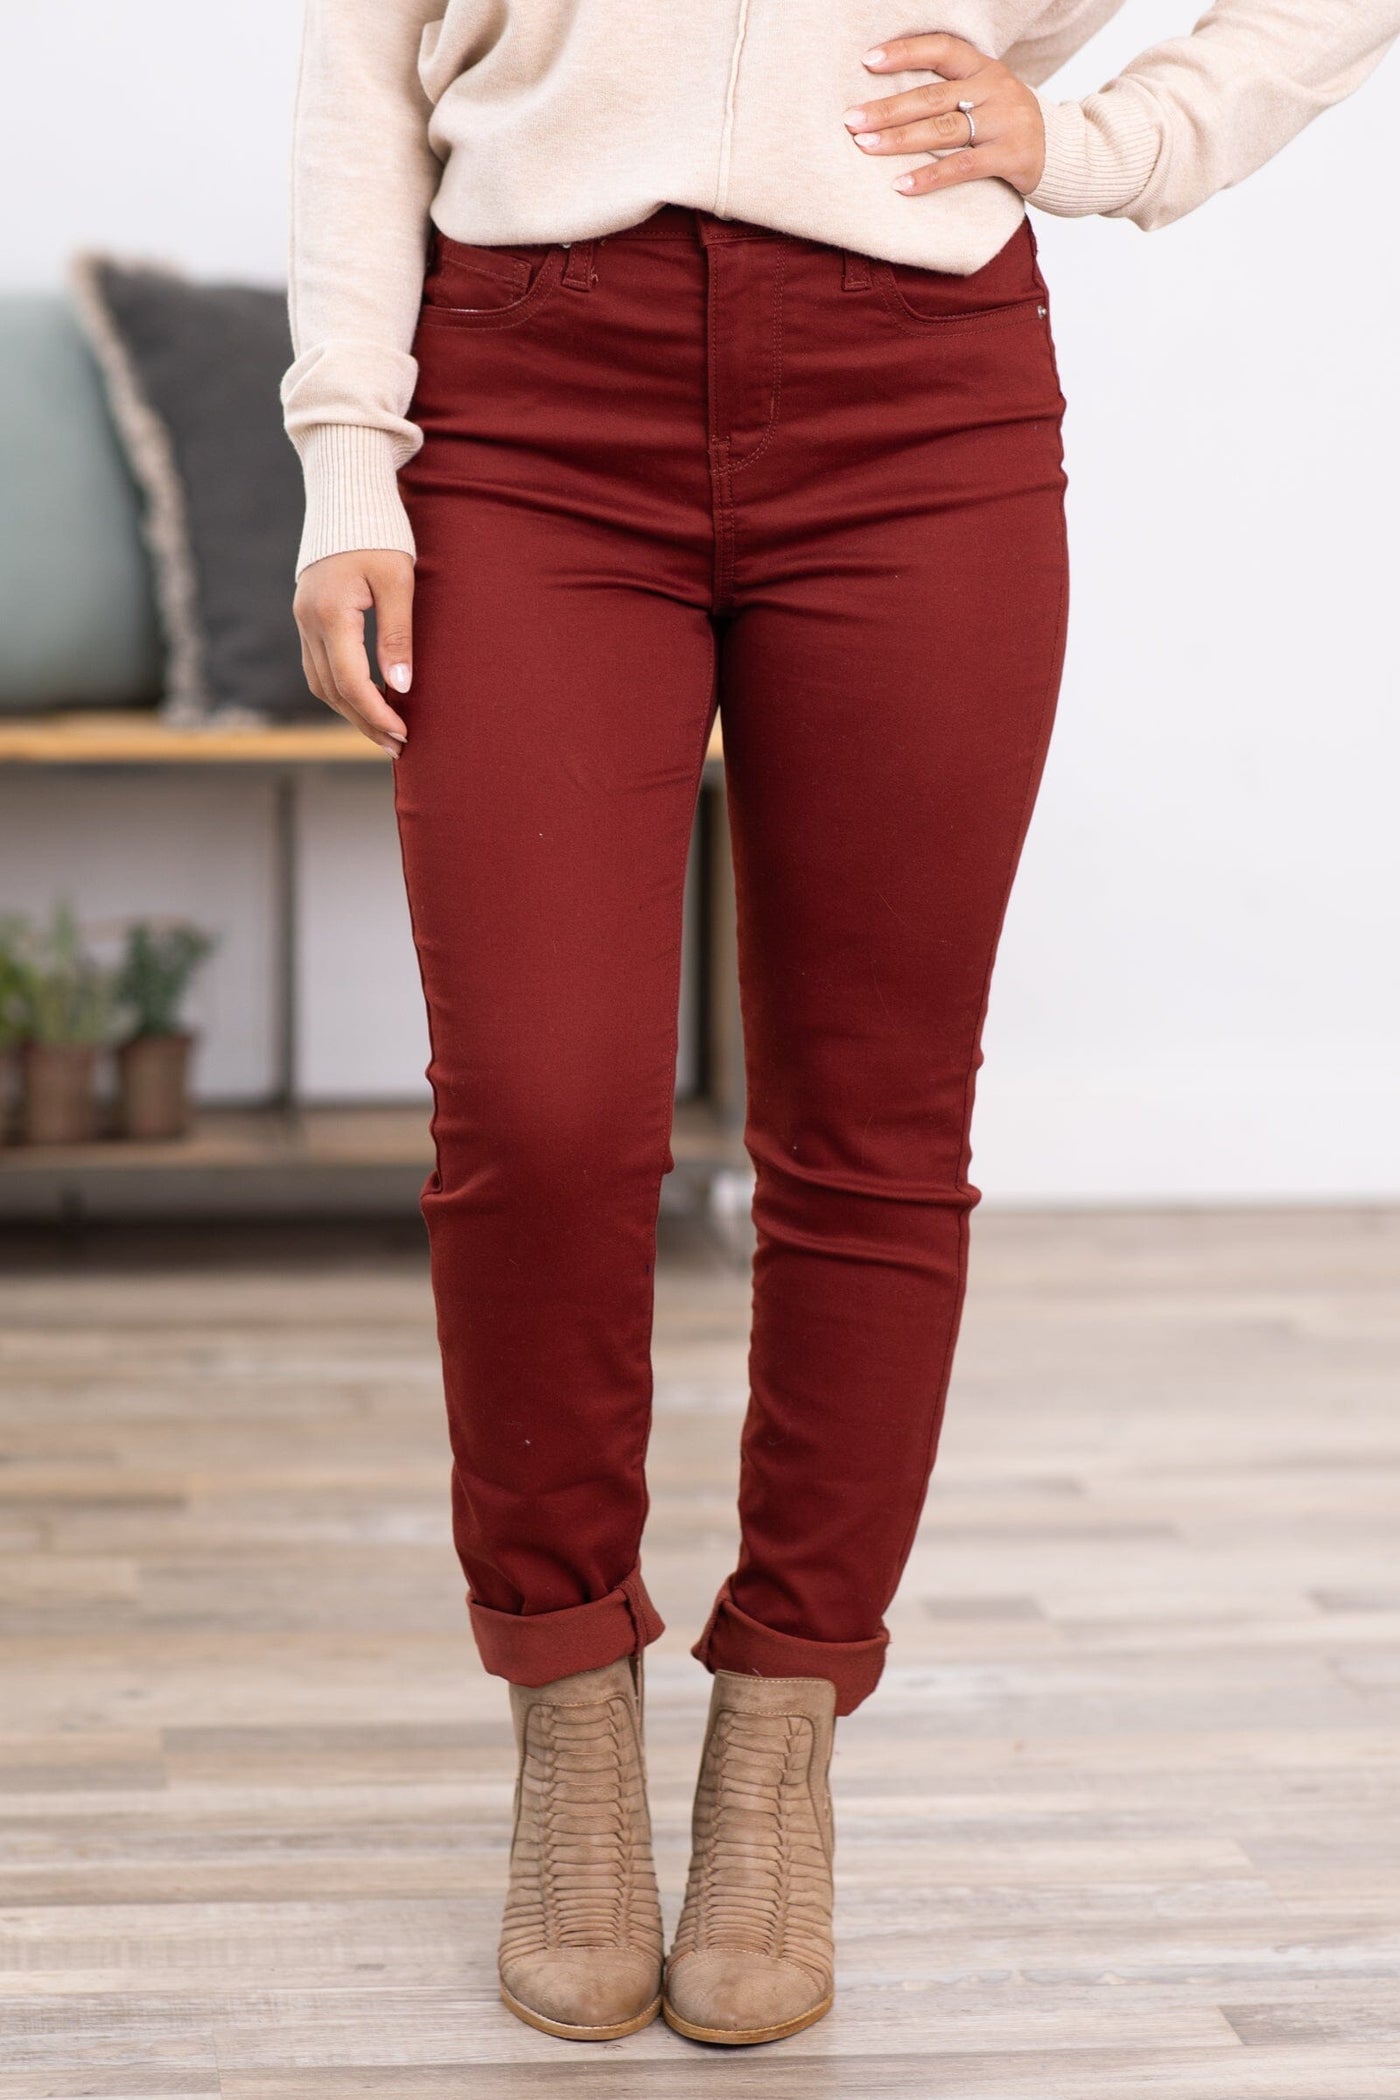 Zenana Maroon Skinny Pants With Stretch - Filly Flair